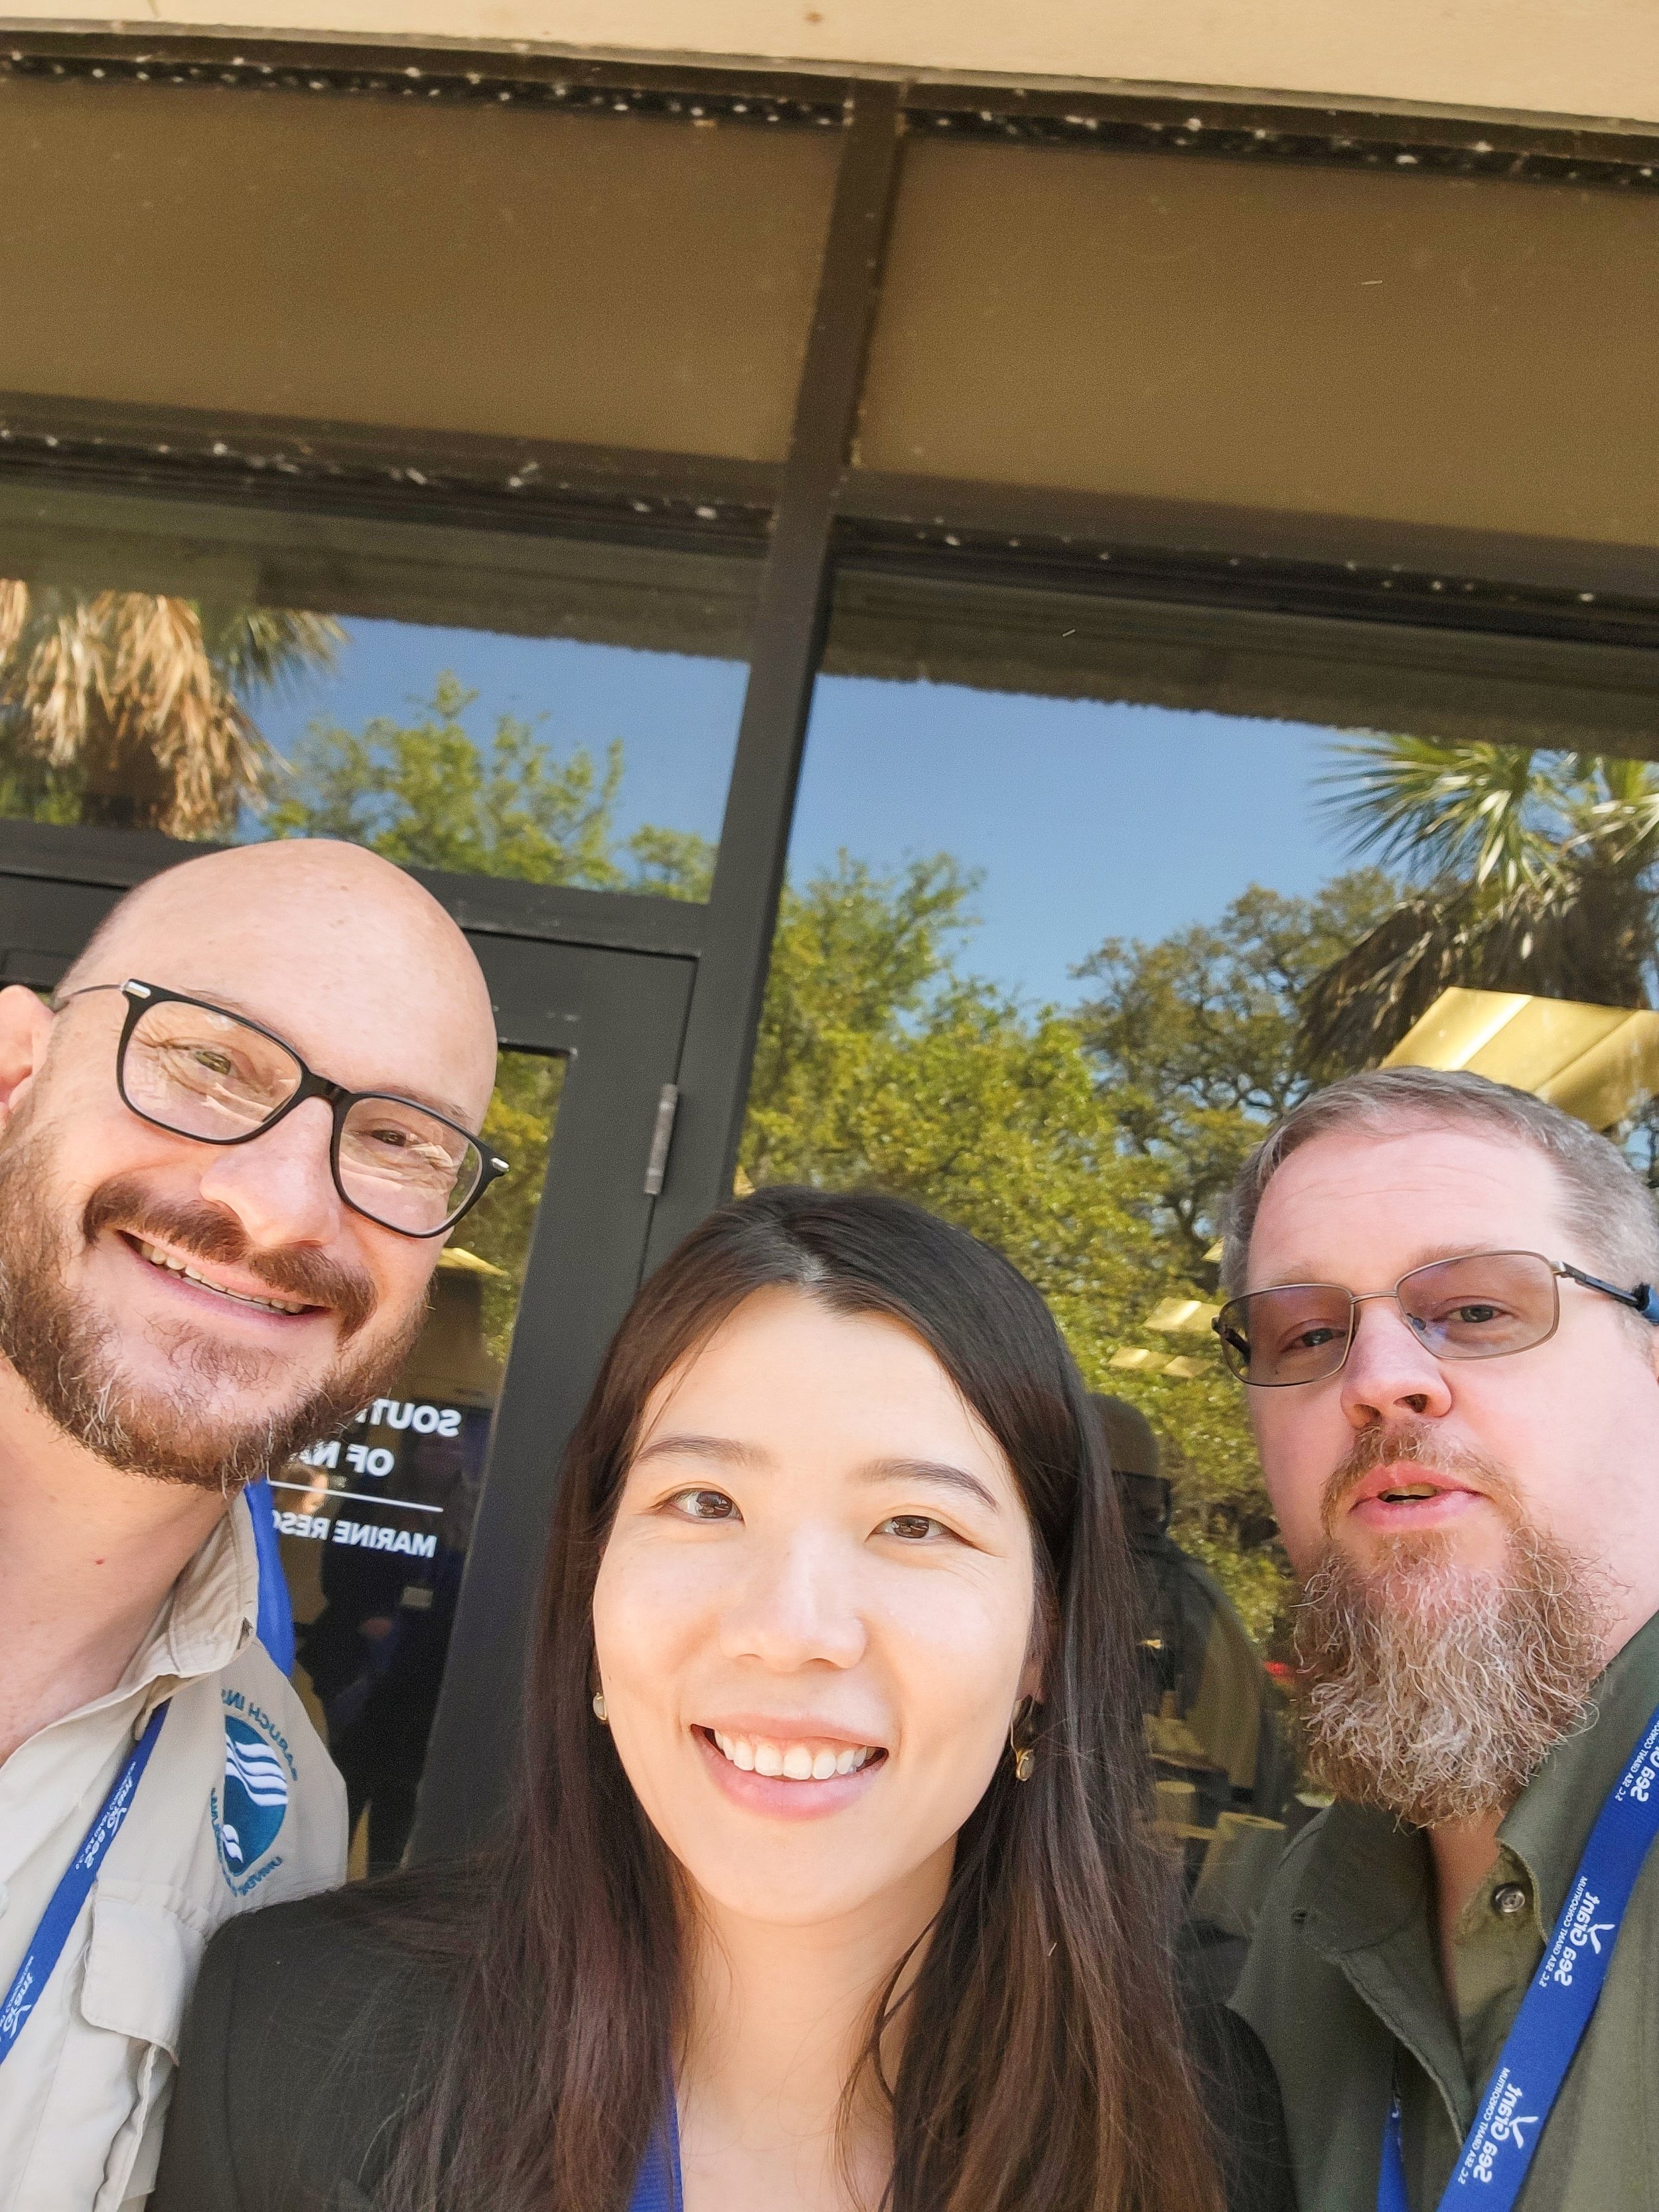  From left to right: William Strosnider from The University of South Carolina, Yidian Liu from PolyGone Systems, Joshua Brown from NOAA Sea Grant 